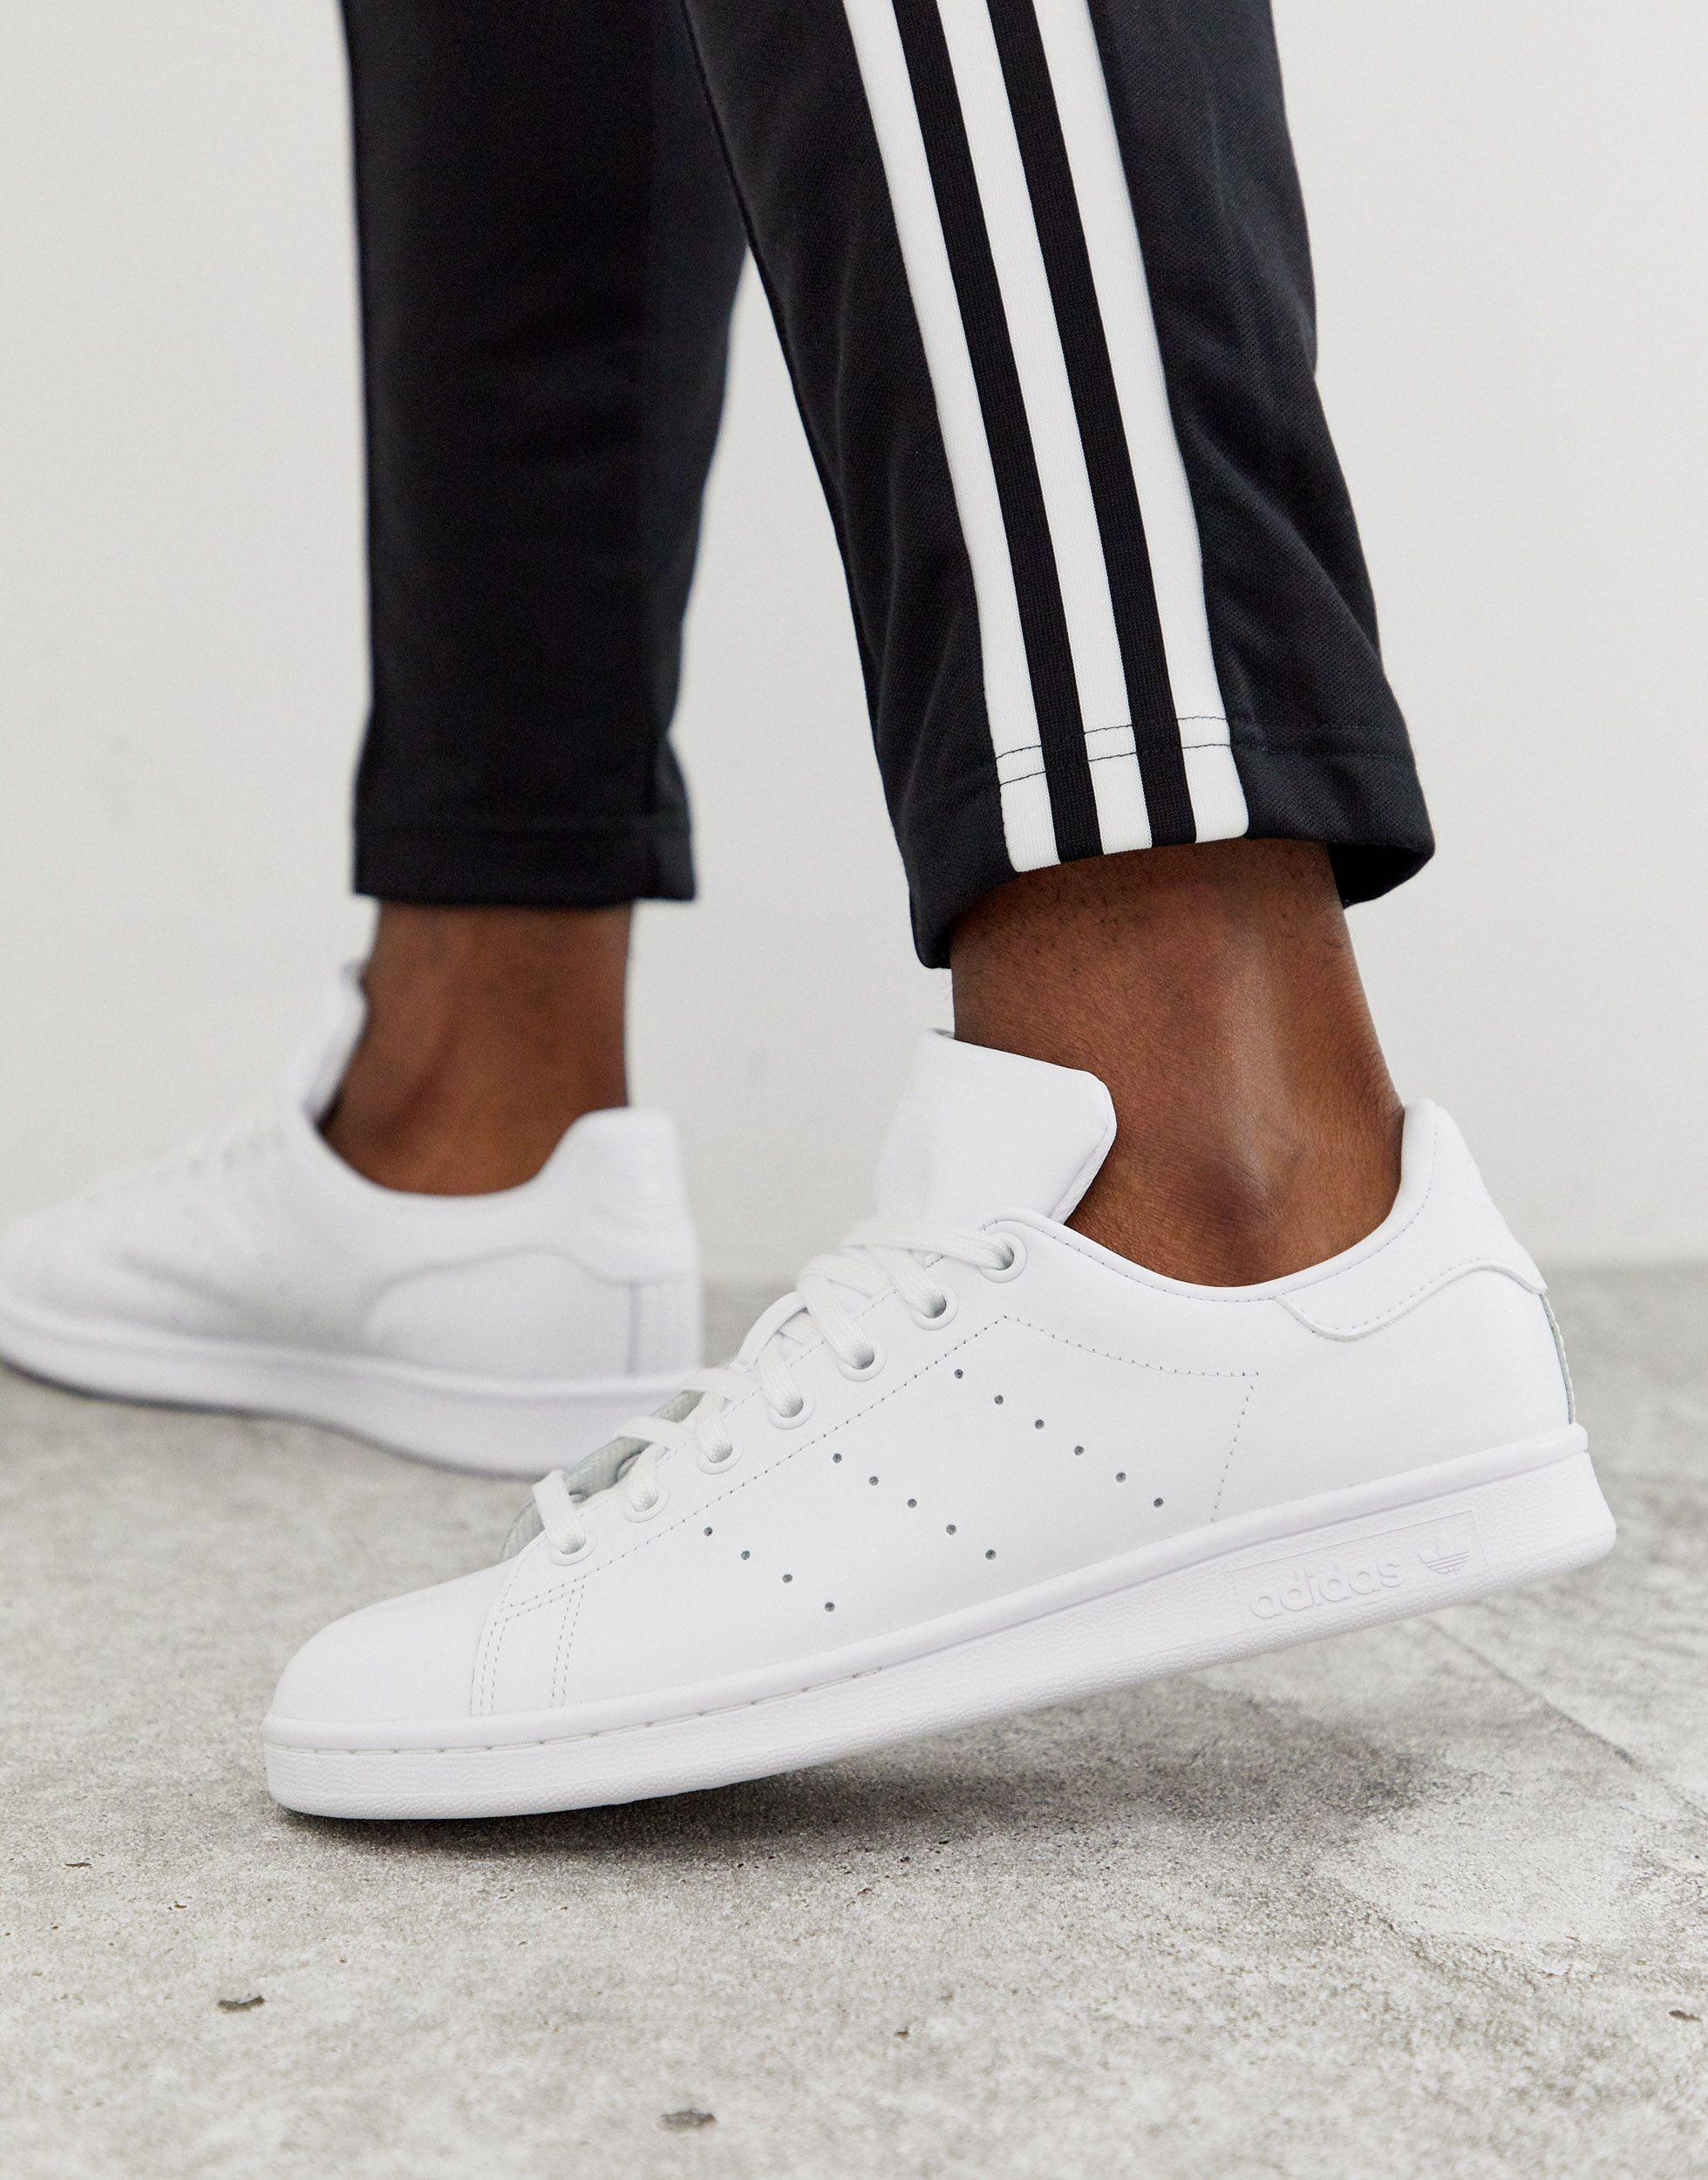 adidas Originals Leather 'stan Smith' Sneakers in White for Men - Save 65%  - Lyst